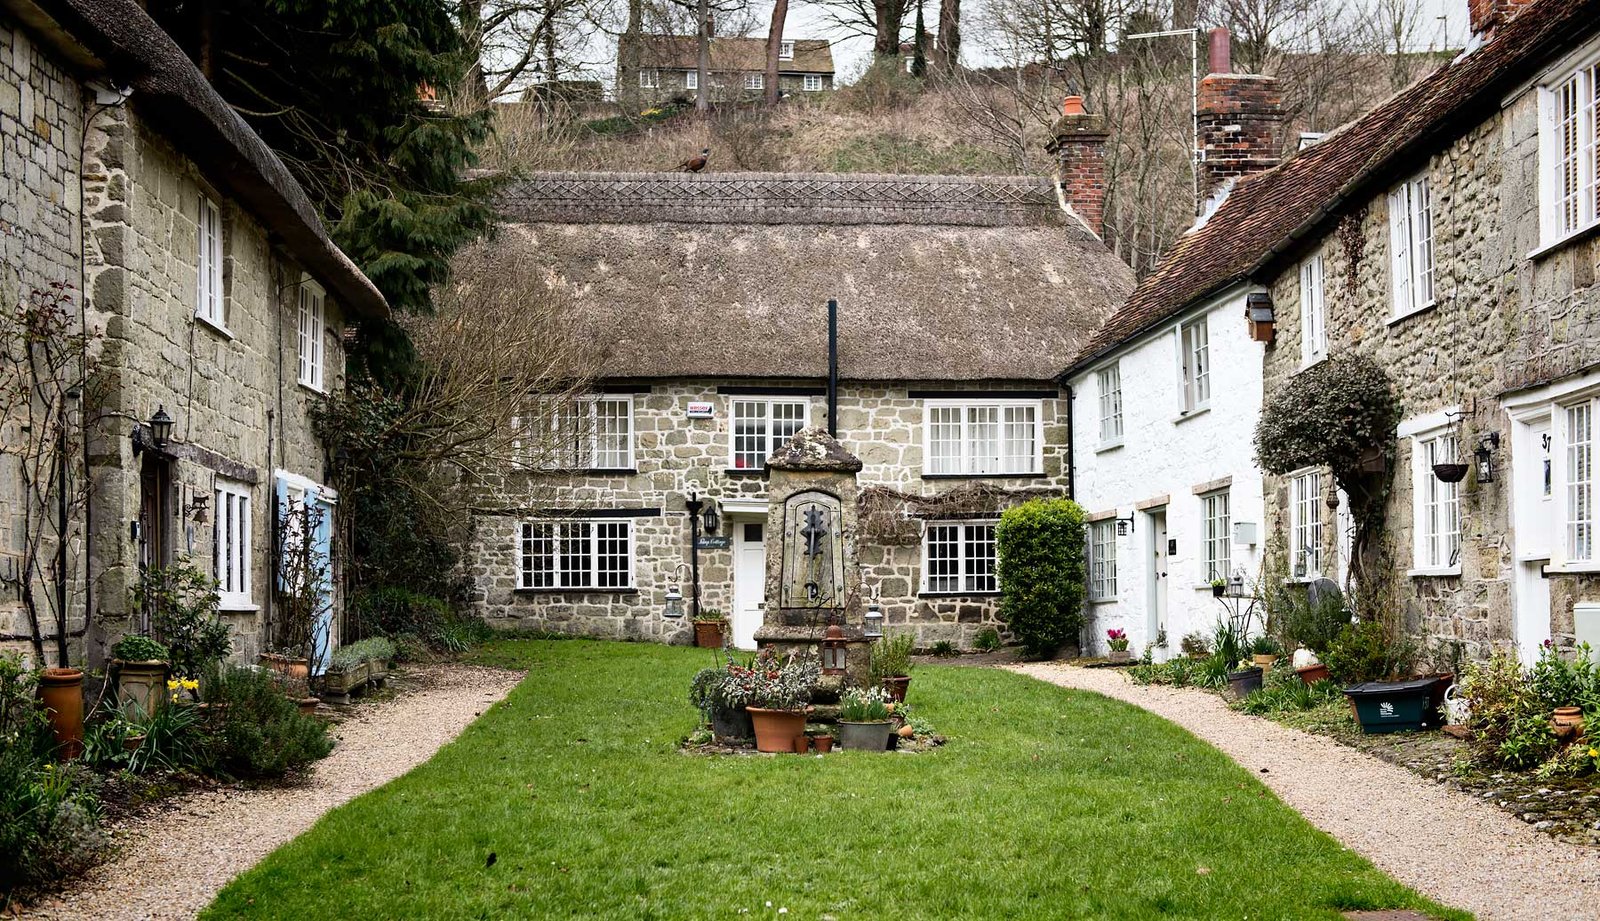 English Road Trip to Instagram Gold Hill in Shaftesbury, Dorset